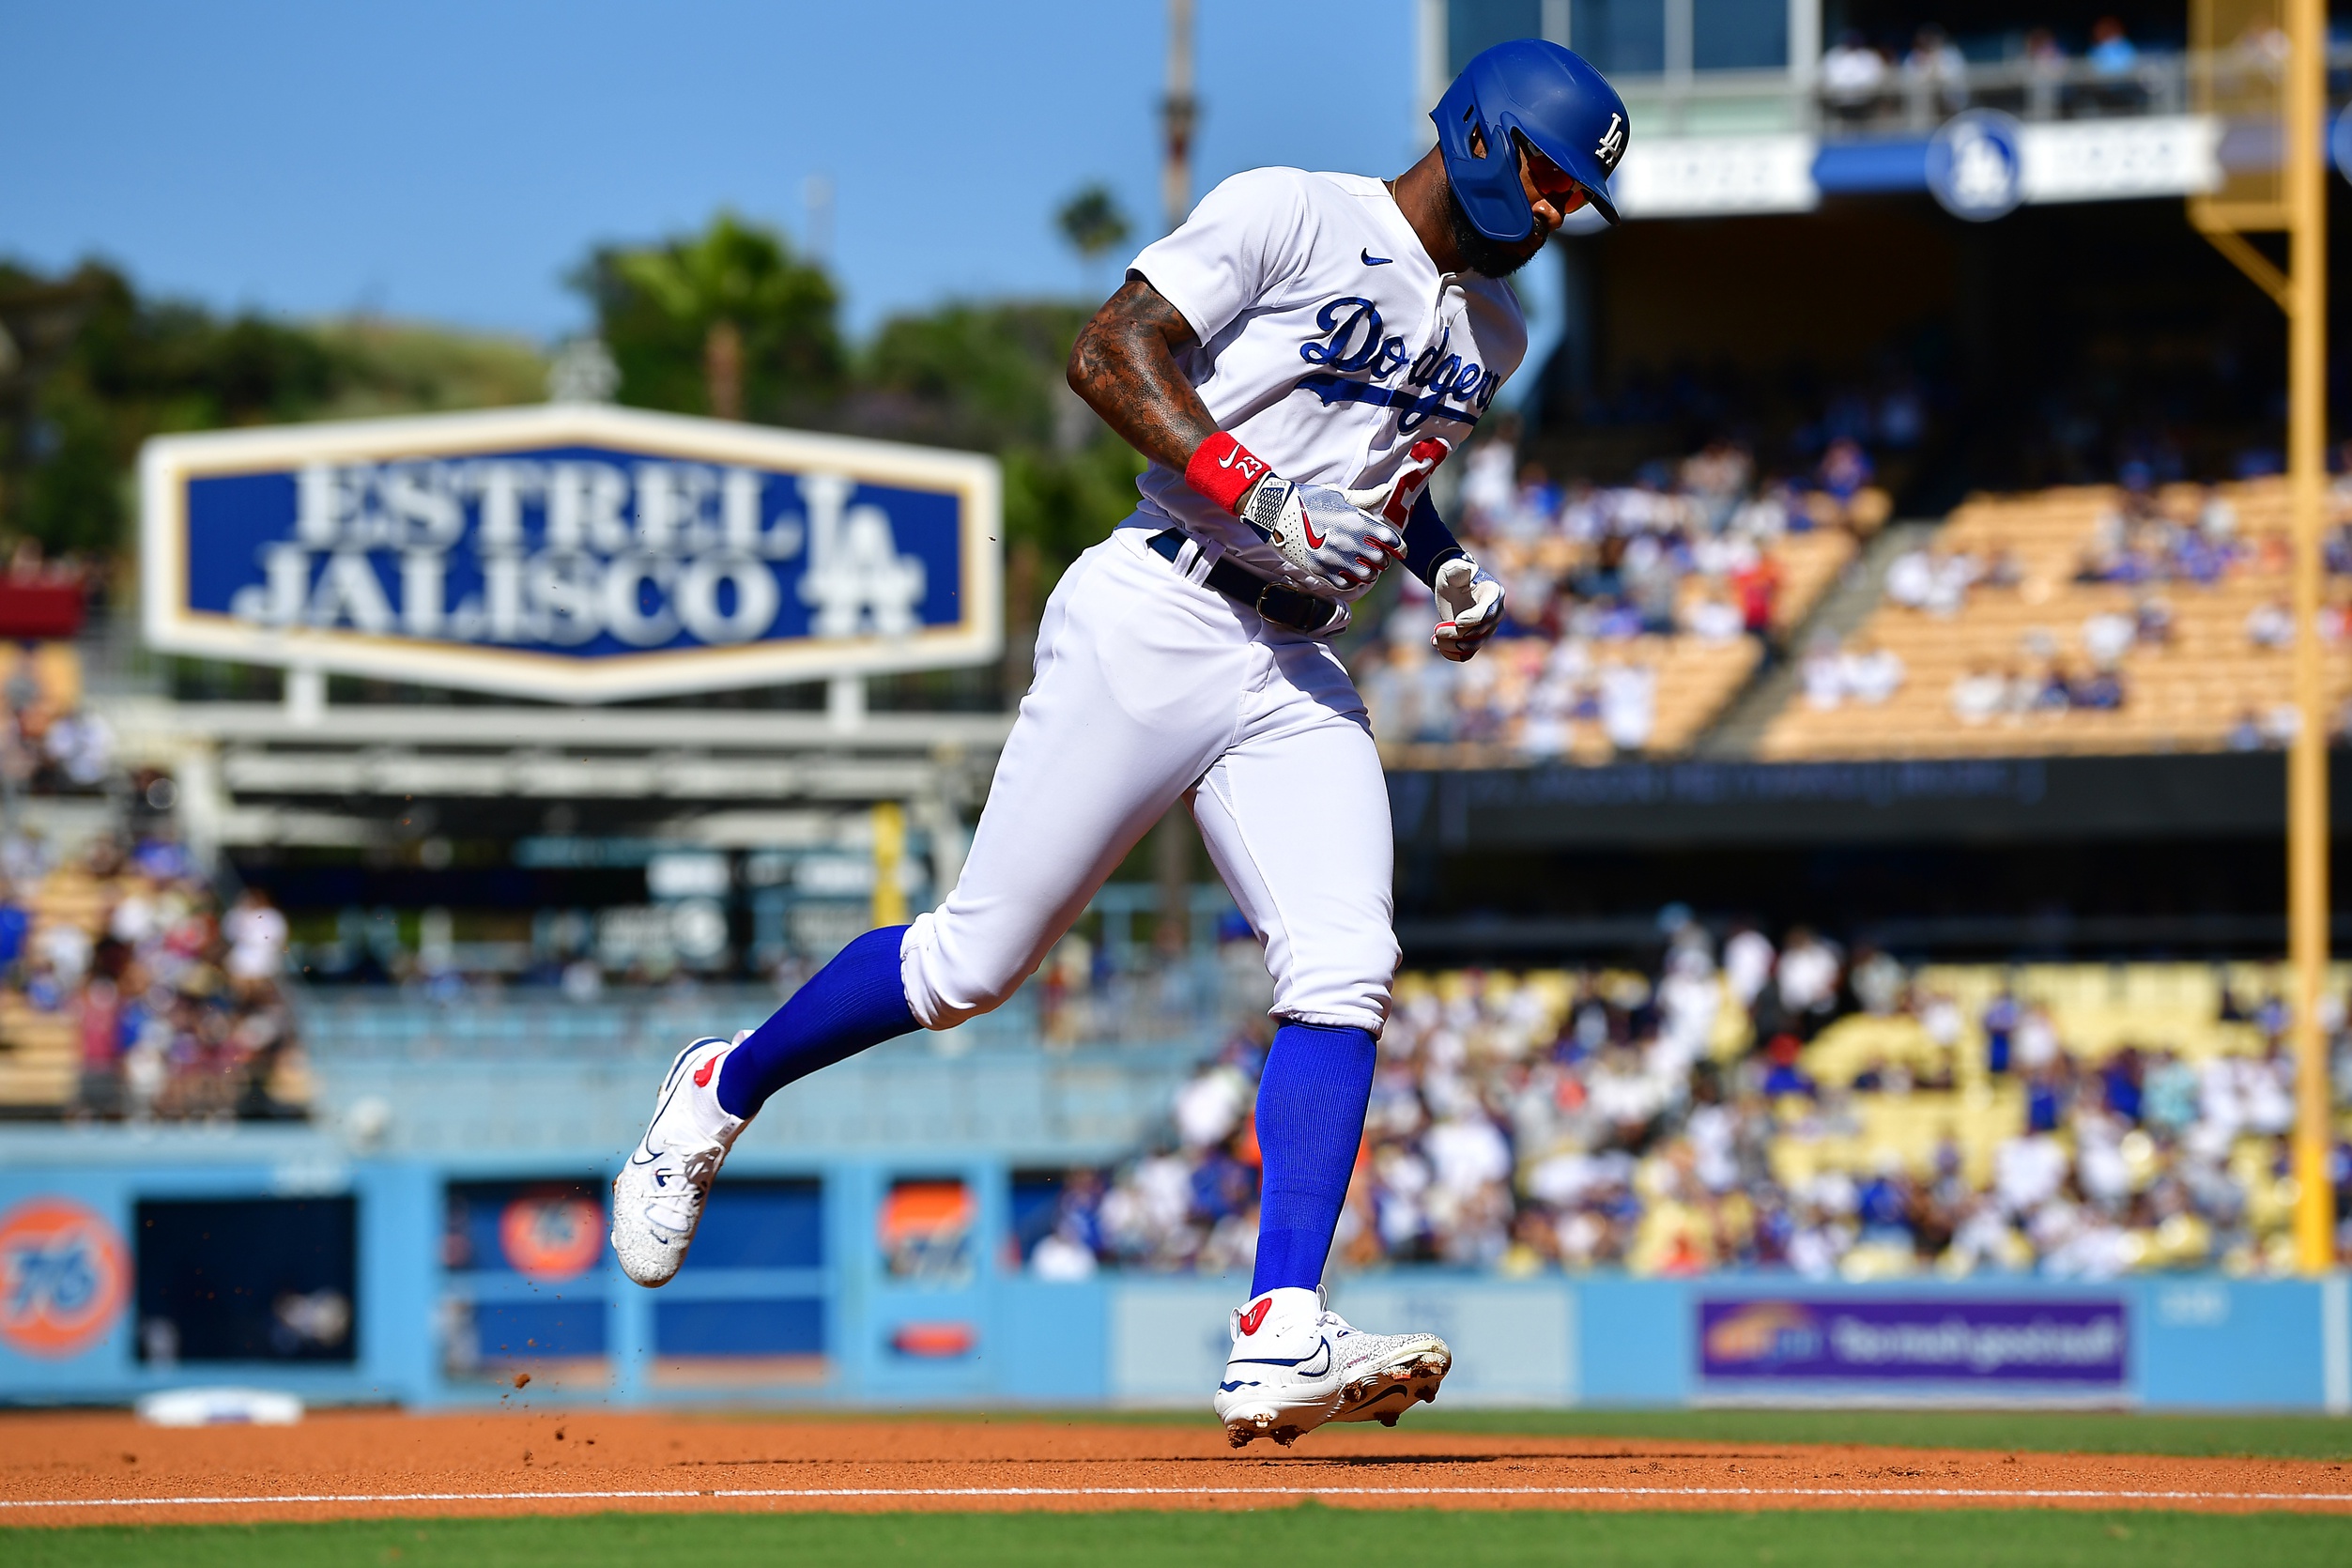 Talkin' Baseball on X: The Los Angeles Dodgers are NL West